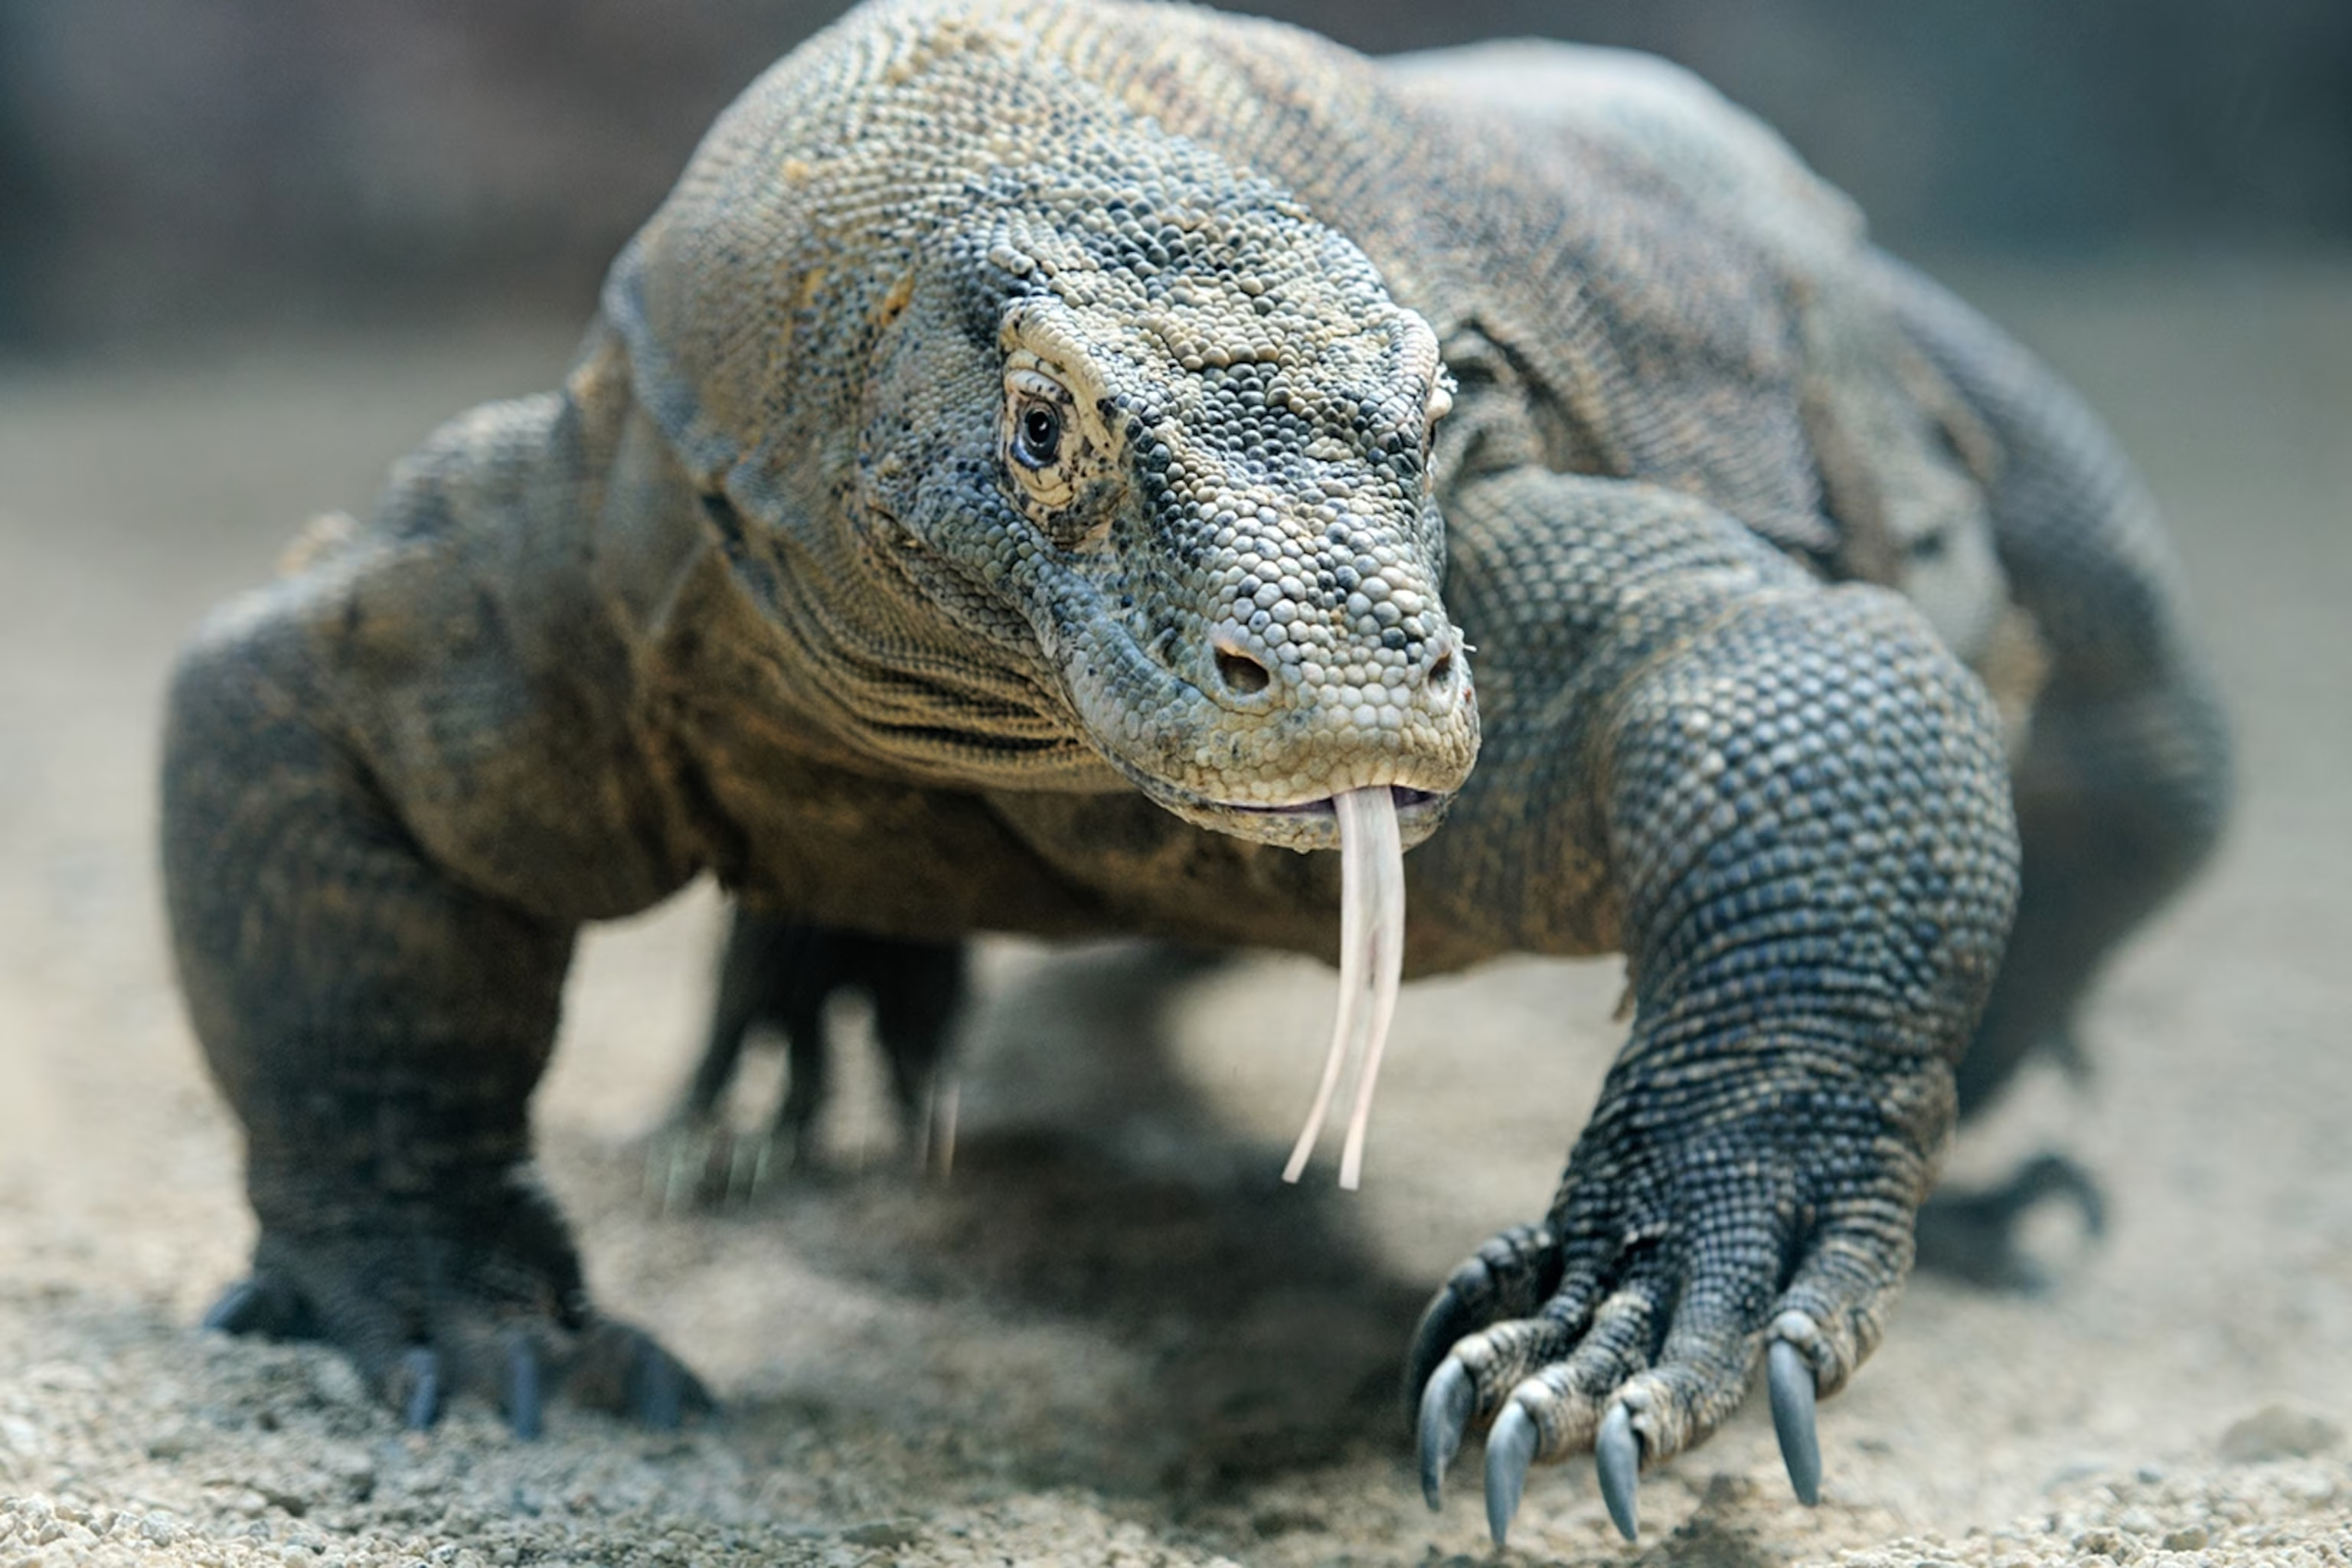 Metal mouth – Komodo dragons' teeth found to have a sharp iron coating